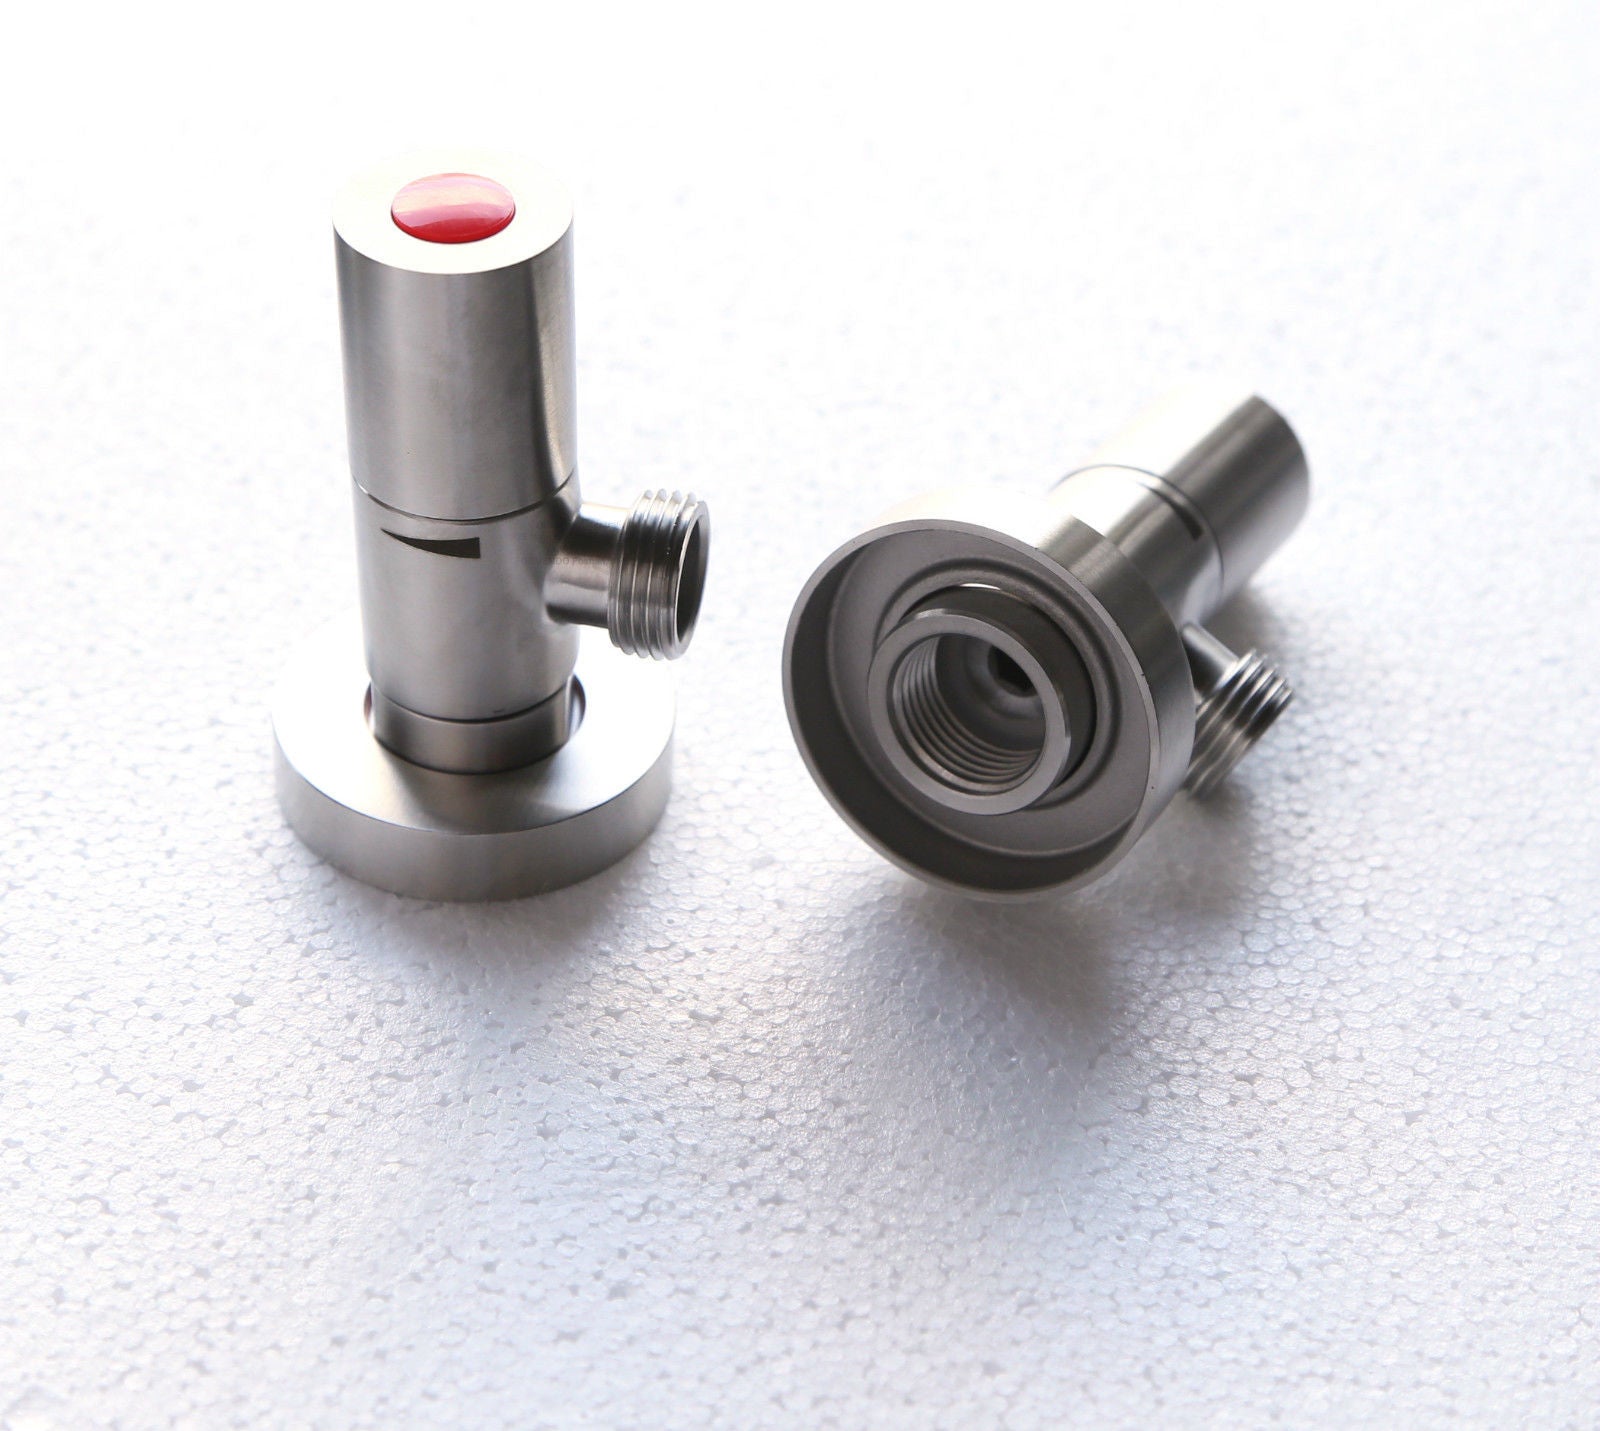 Stainless Steel Angle Valve - Lead-free for white bathroom